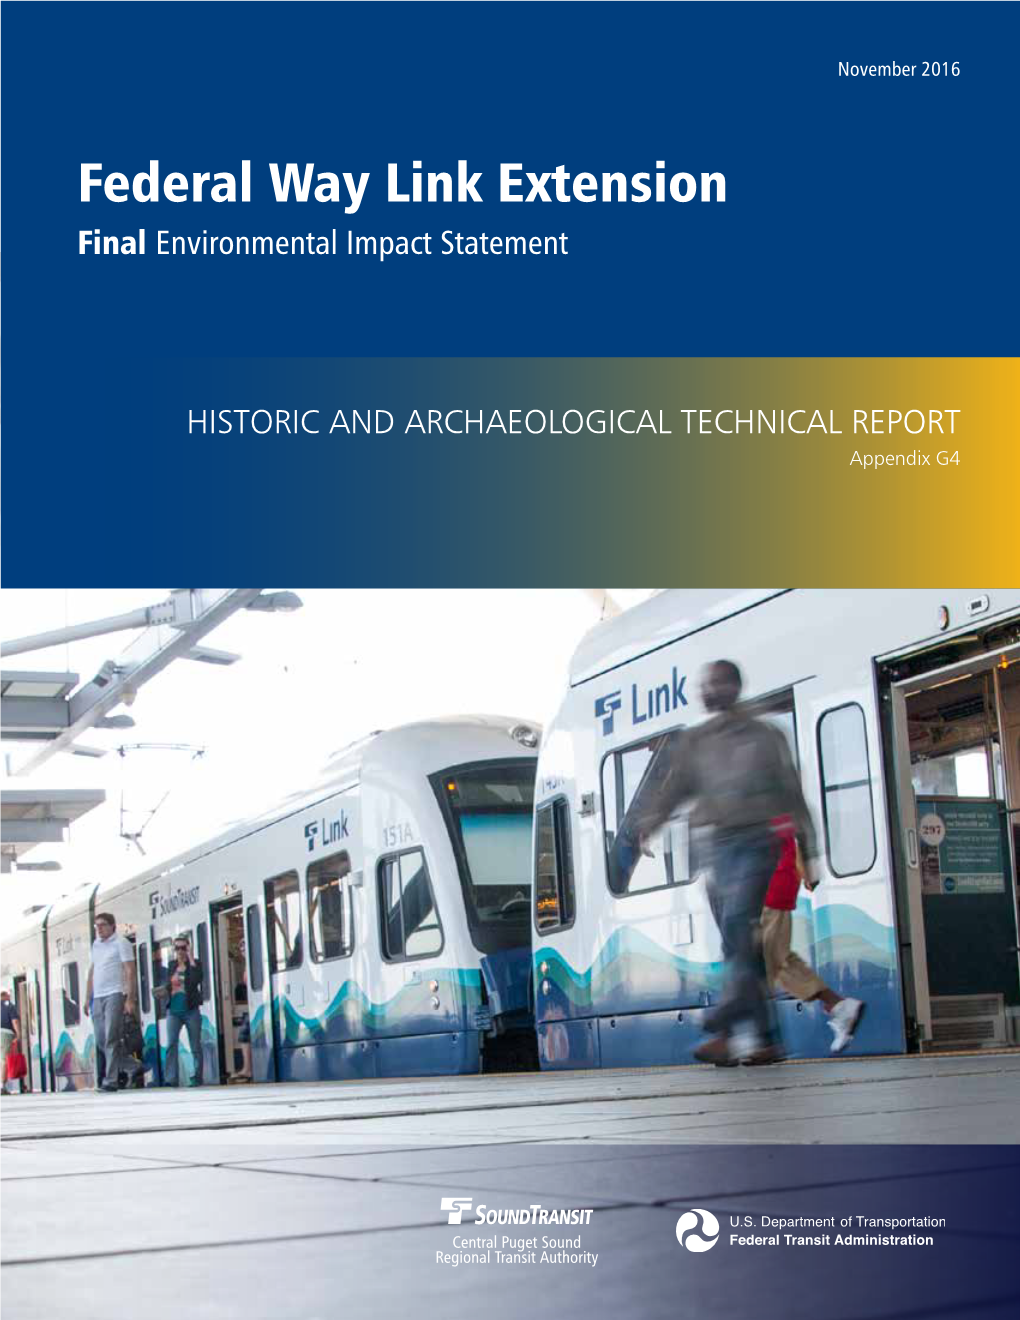 Federal Way Link Extension Final Environmental Impact Statement